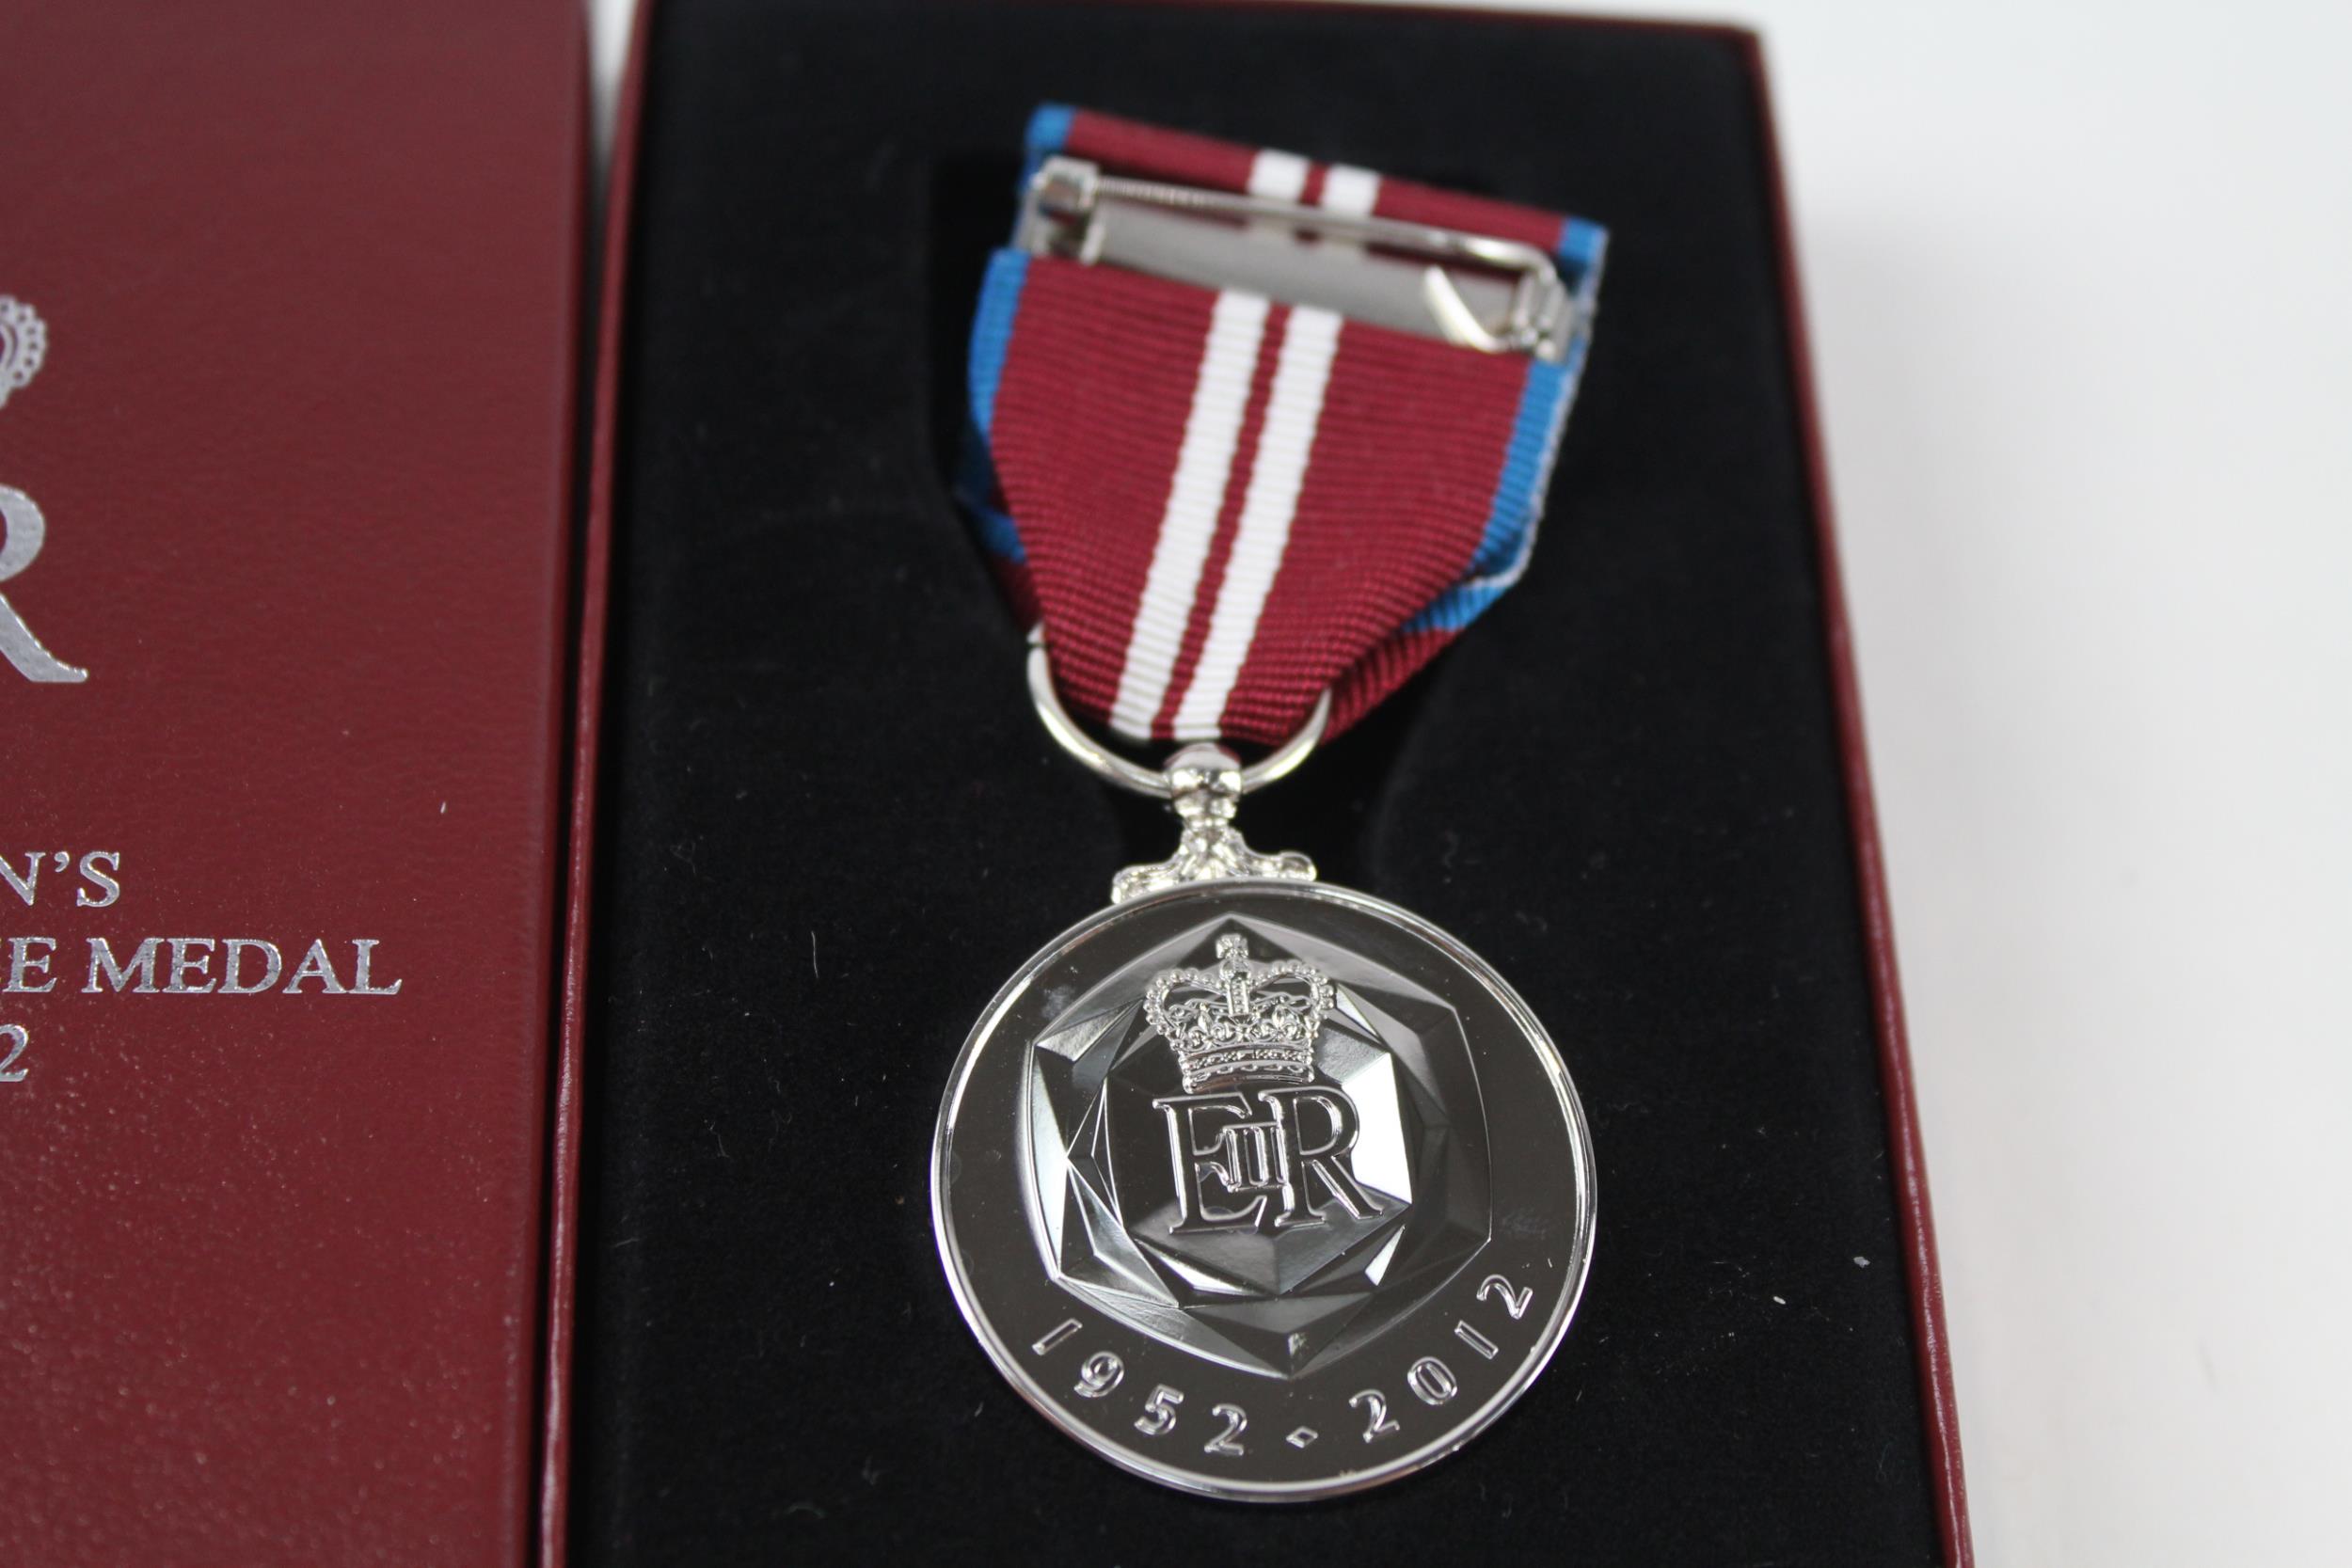 Boxed ERII Queens Diamond Jubilee Medal - Boxed ERII Queens Diamond Jubilee Medal In antique/vintage - Image 4 of 4